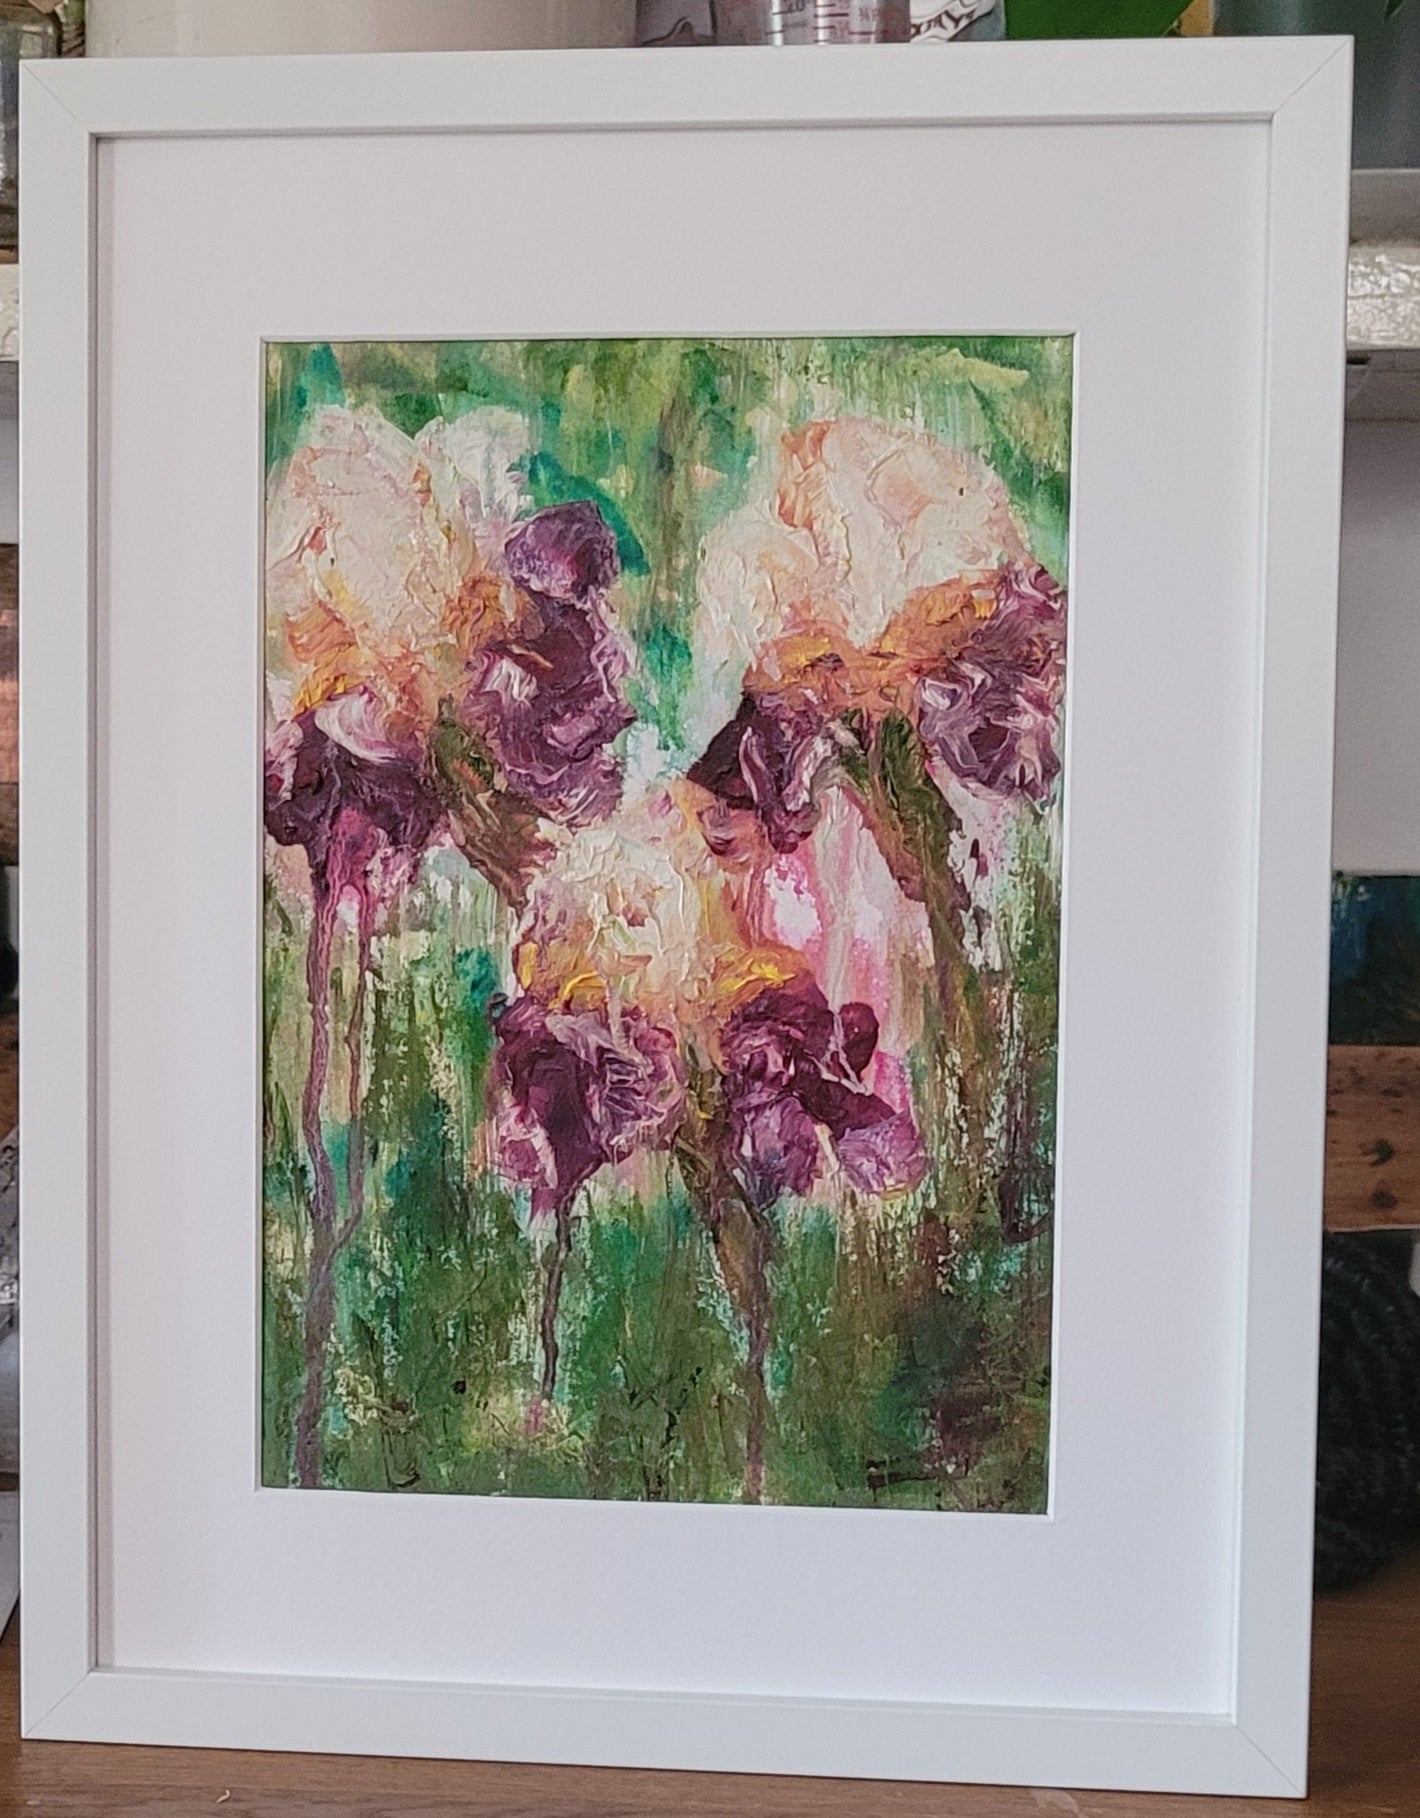 Oil Painting of Iris Flowers against an abstract green garden background in a white frame